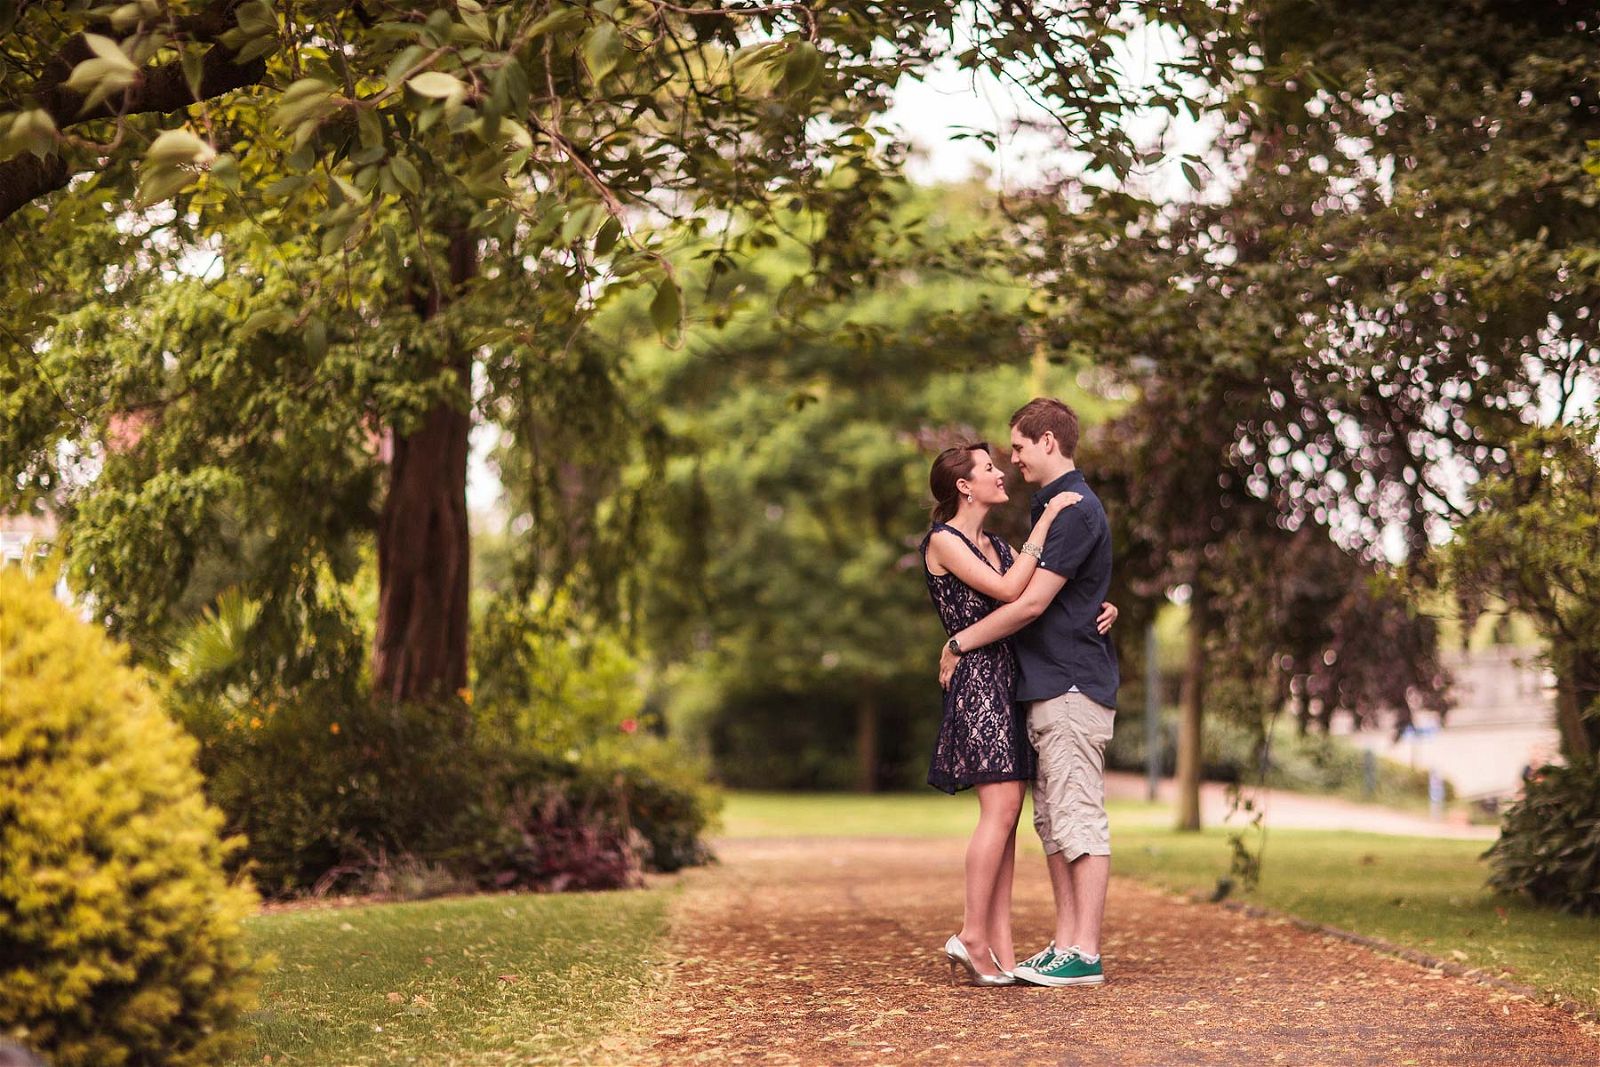 Utilising the setting of Victoria Park in Stafford for a relaxed engagement portrait session with Lichfield Reportage Wedding Photographer Stuart James